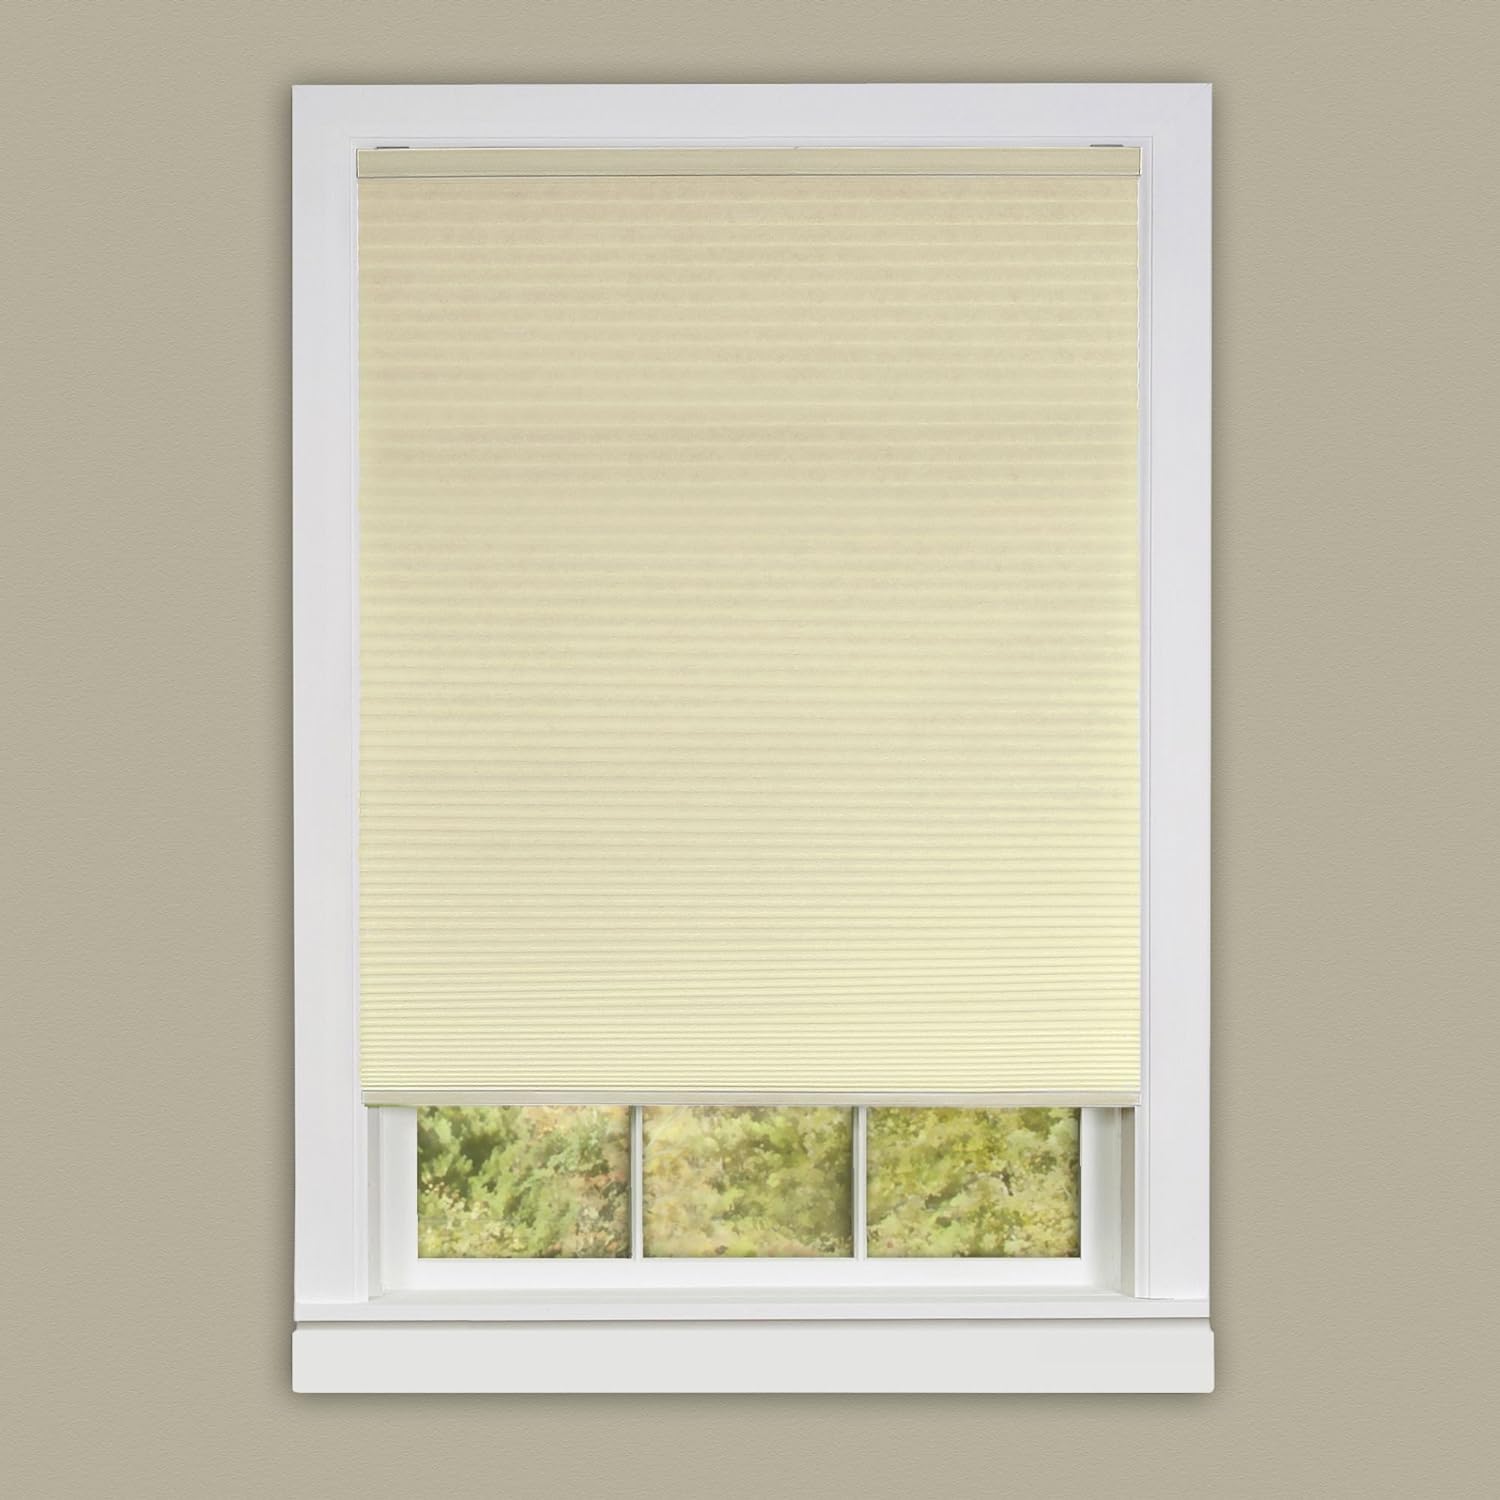 Achim Importing Co. Top Down-Bottom Up Cordless Honeycomb Cellular Shade 35x64 White